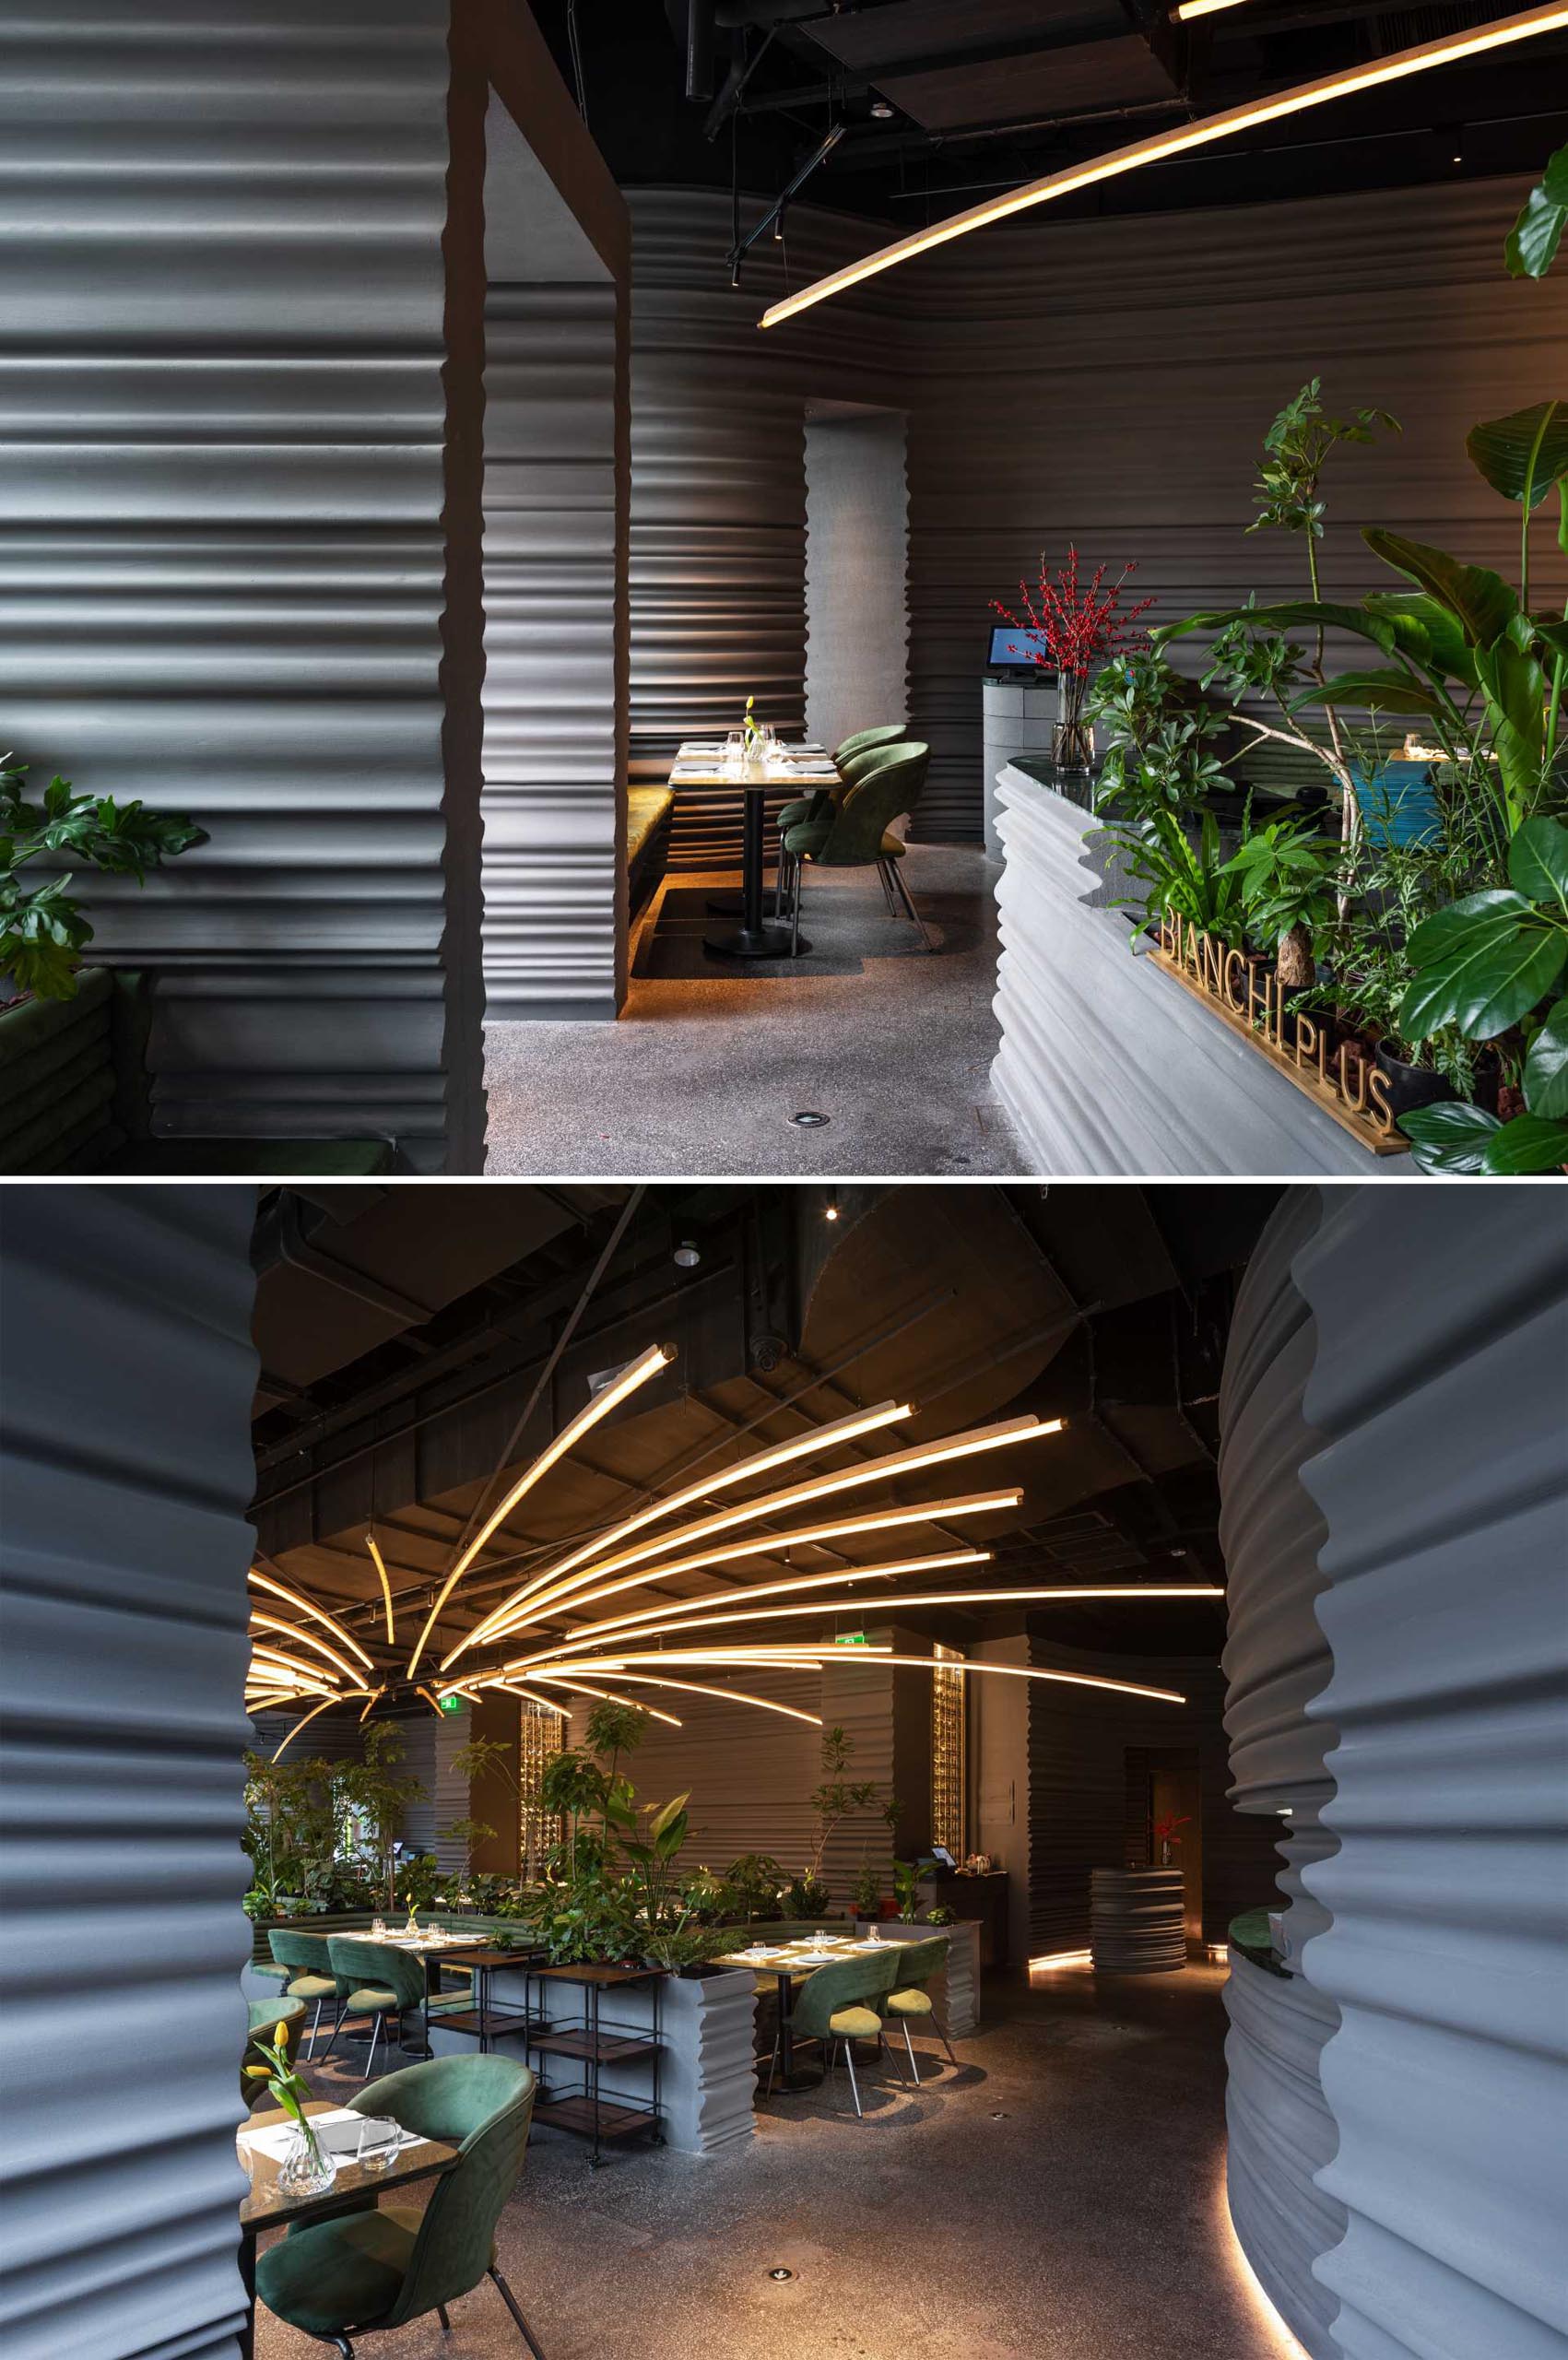 A modern restaurant with sculptural gray walls and plenty of plants.